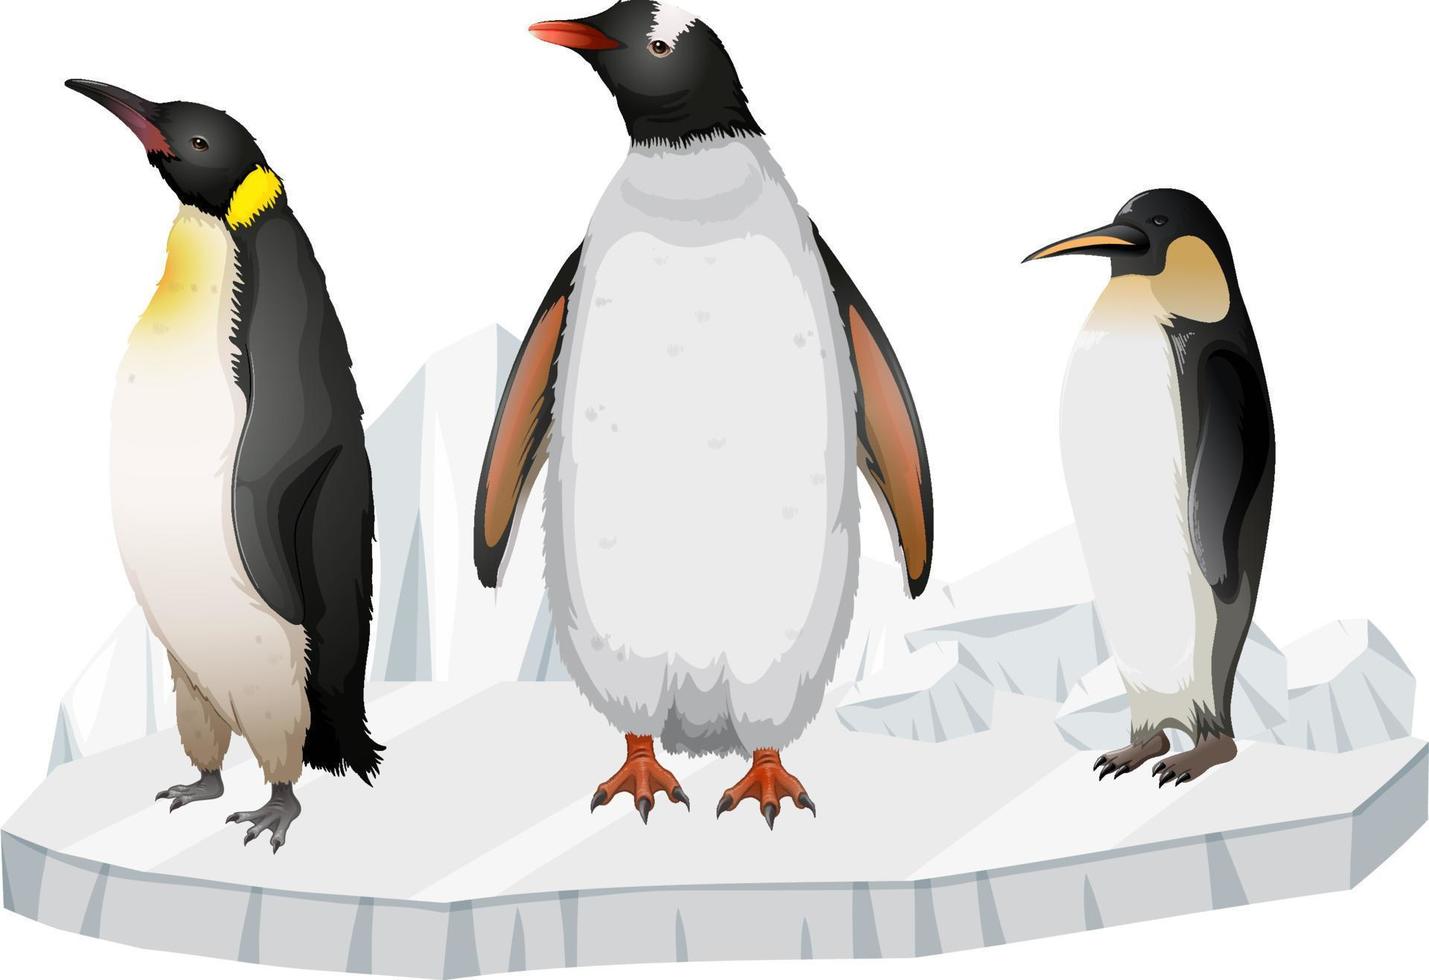 Penguins standing on ice sheet vector